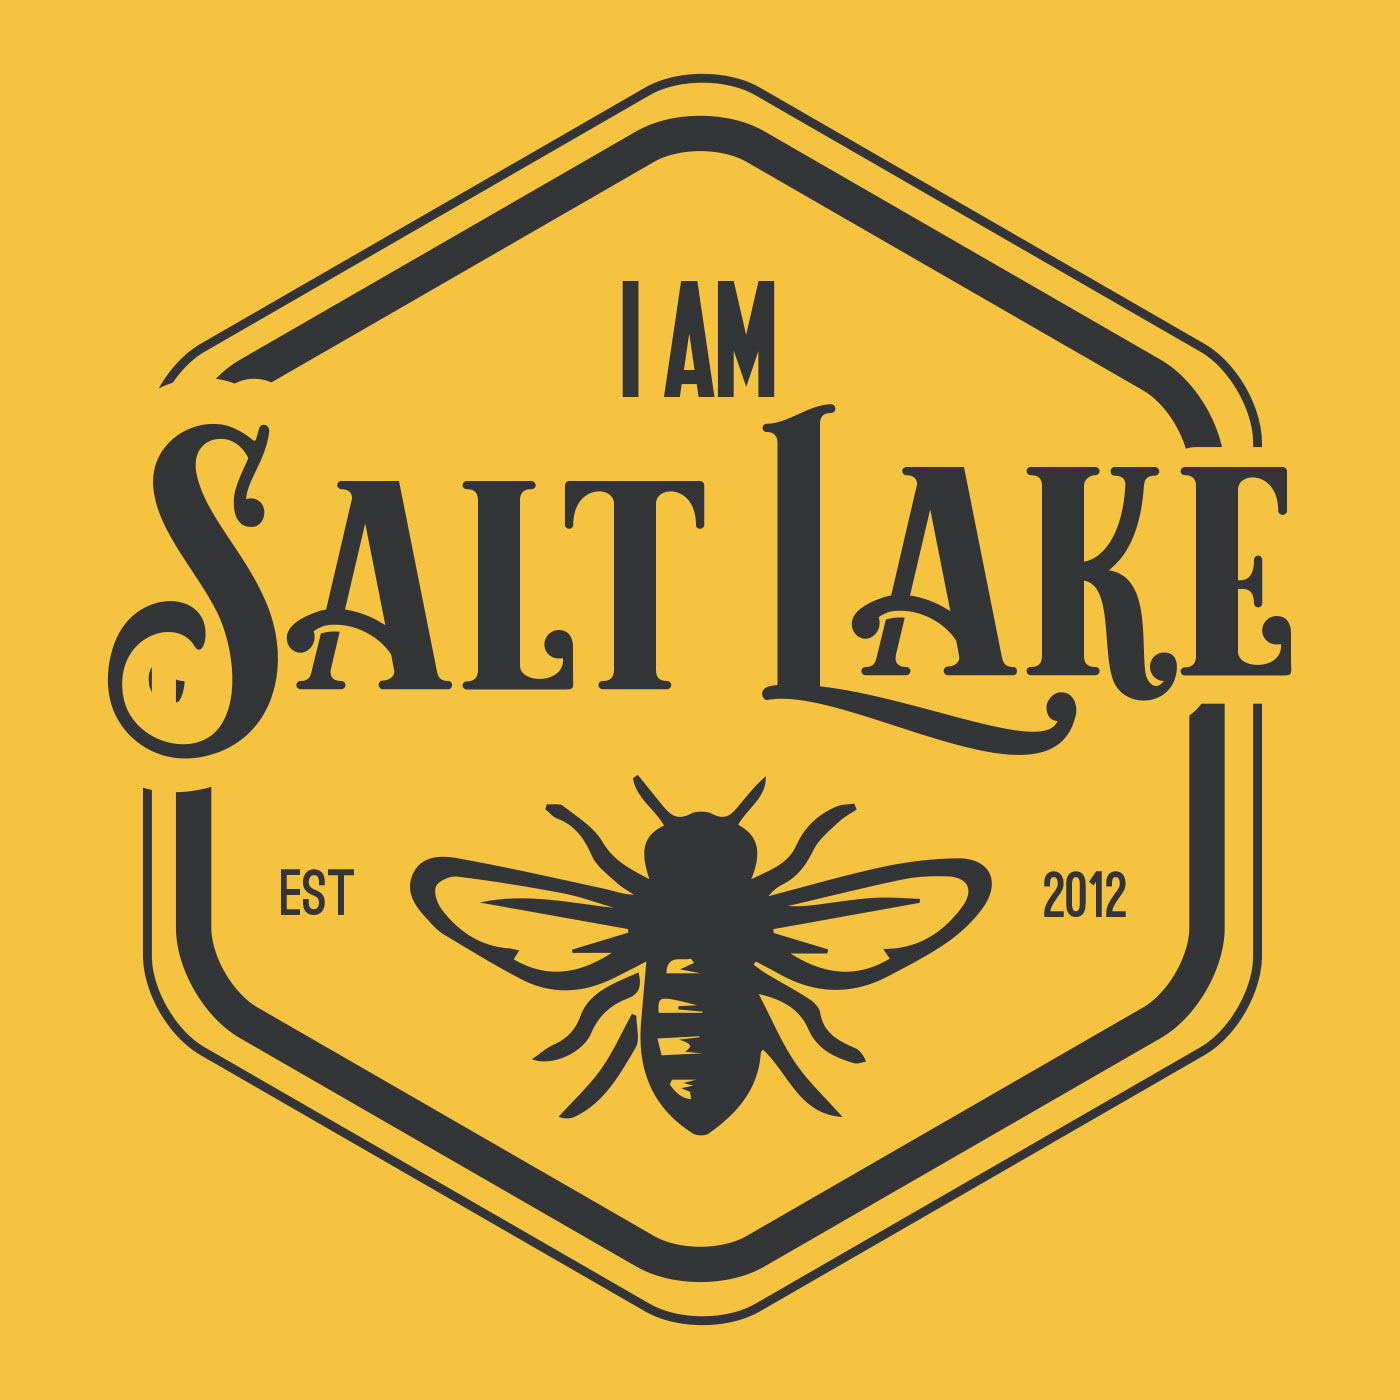 I am Salt Lake: Episode 444 – Angela H. Brown With The 12th Annual Craft Lake City DIY Festival